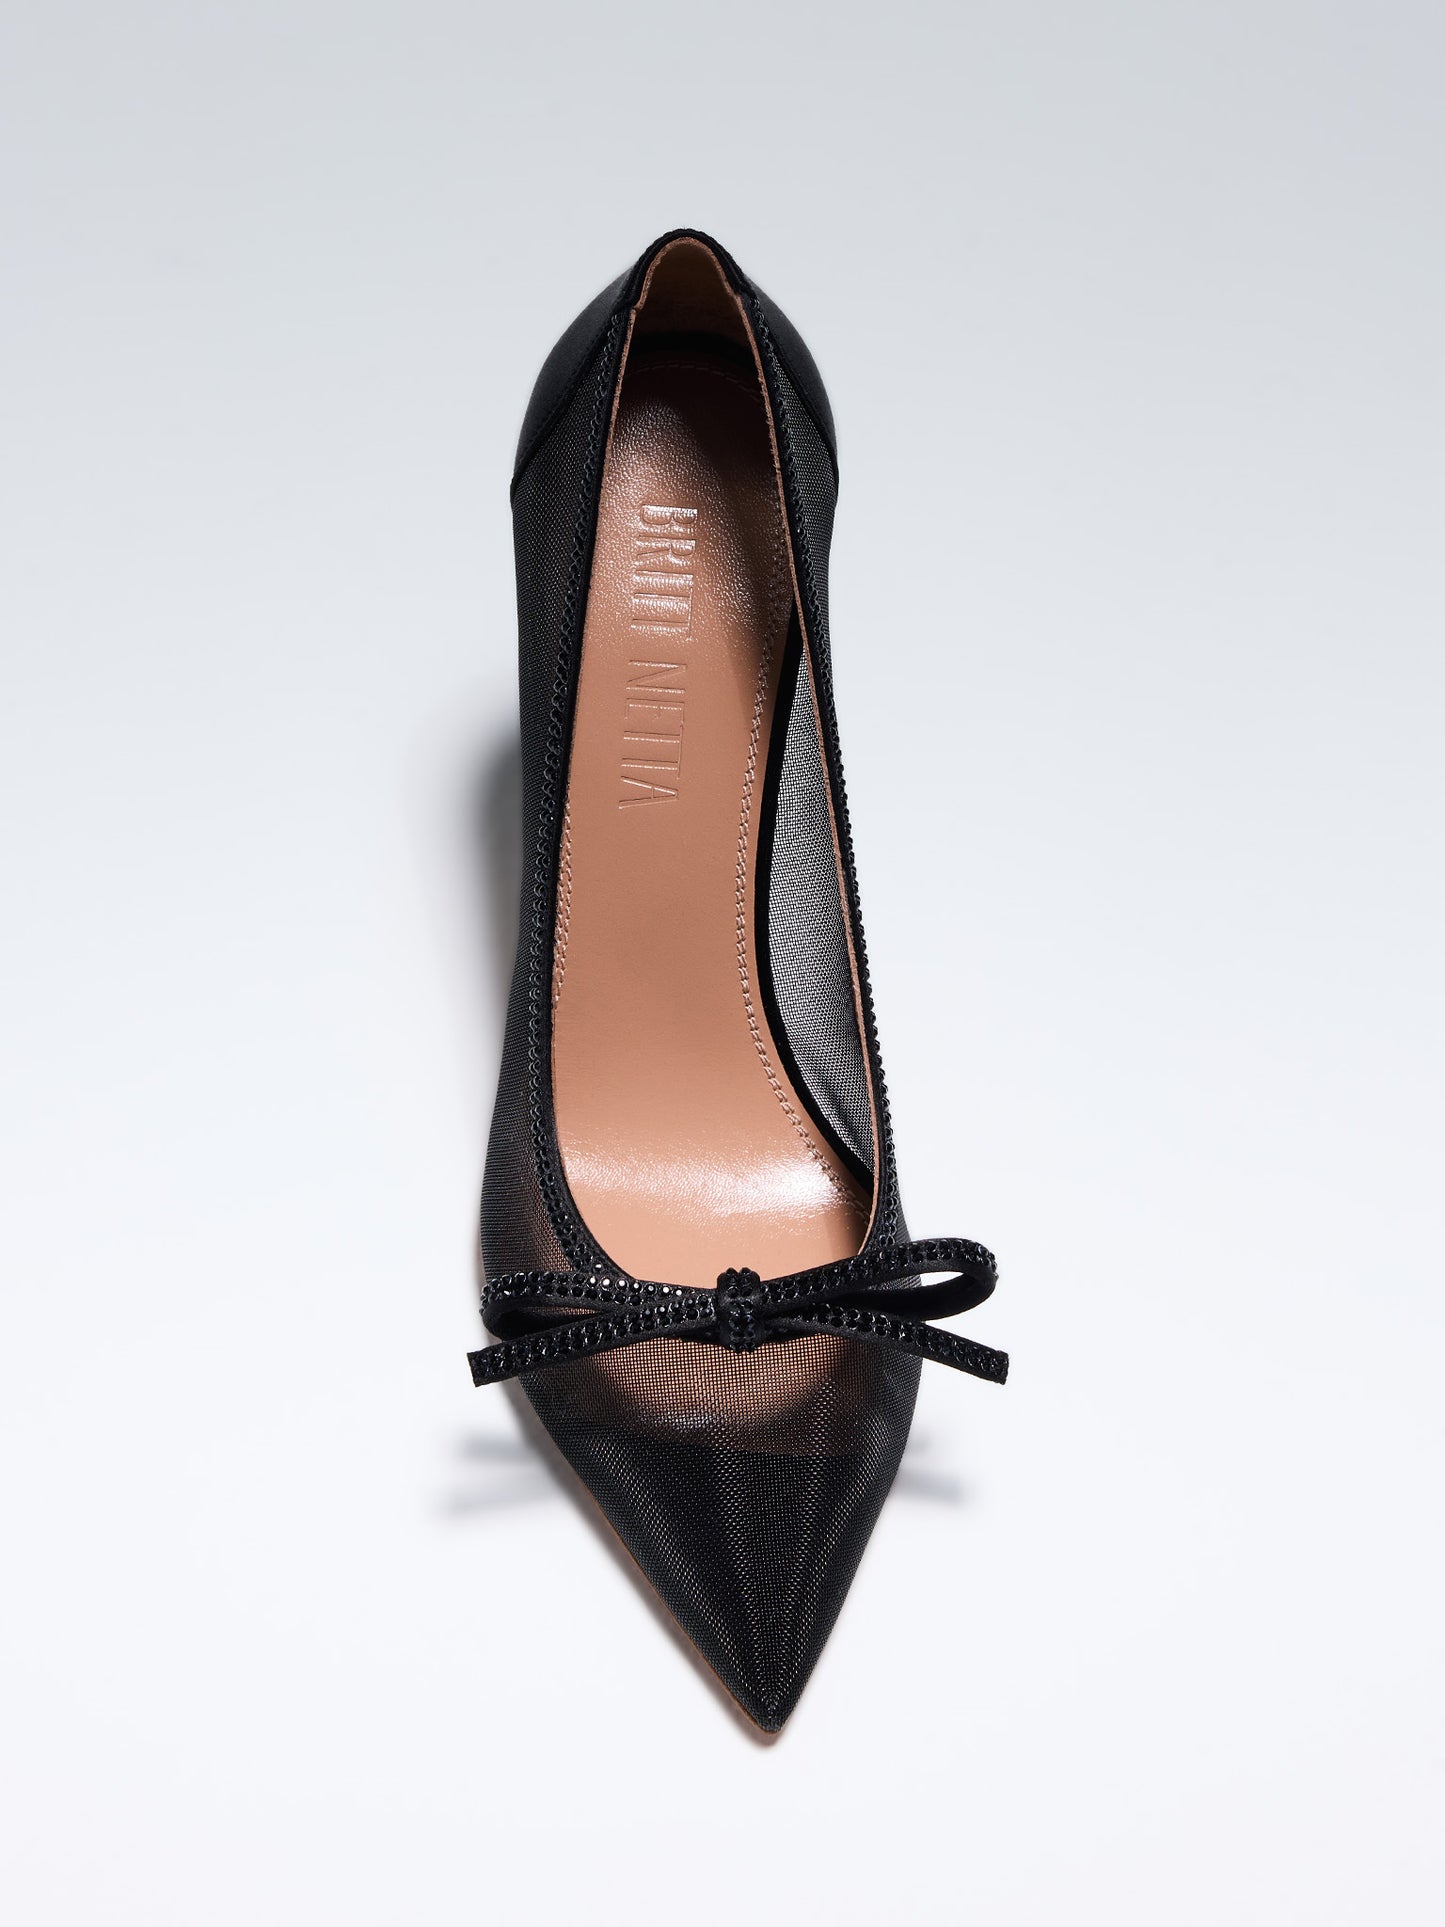 
                  
                    Hand-crafted in Italy, the Cinderella (“Cinderella”) pump features a glossy black satin and is set upon our custom 95mm heel designed for your comfort. Cinderella is accented with our signature mesh upper that gently molds to your foot and features a bold bow that is embellished with glittering Swarovski crystals.
                  
                